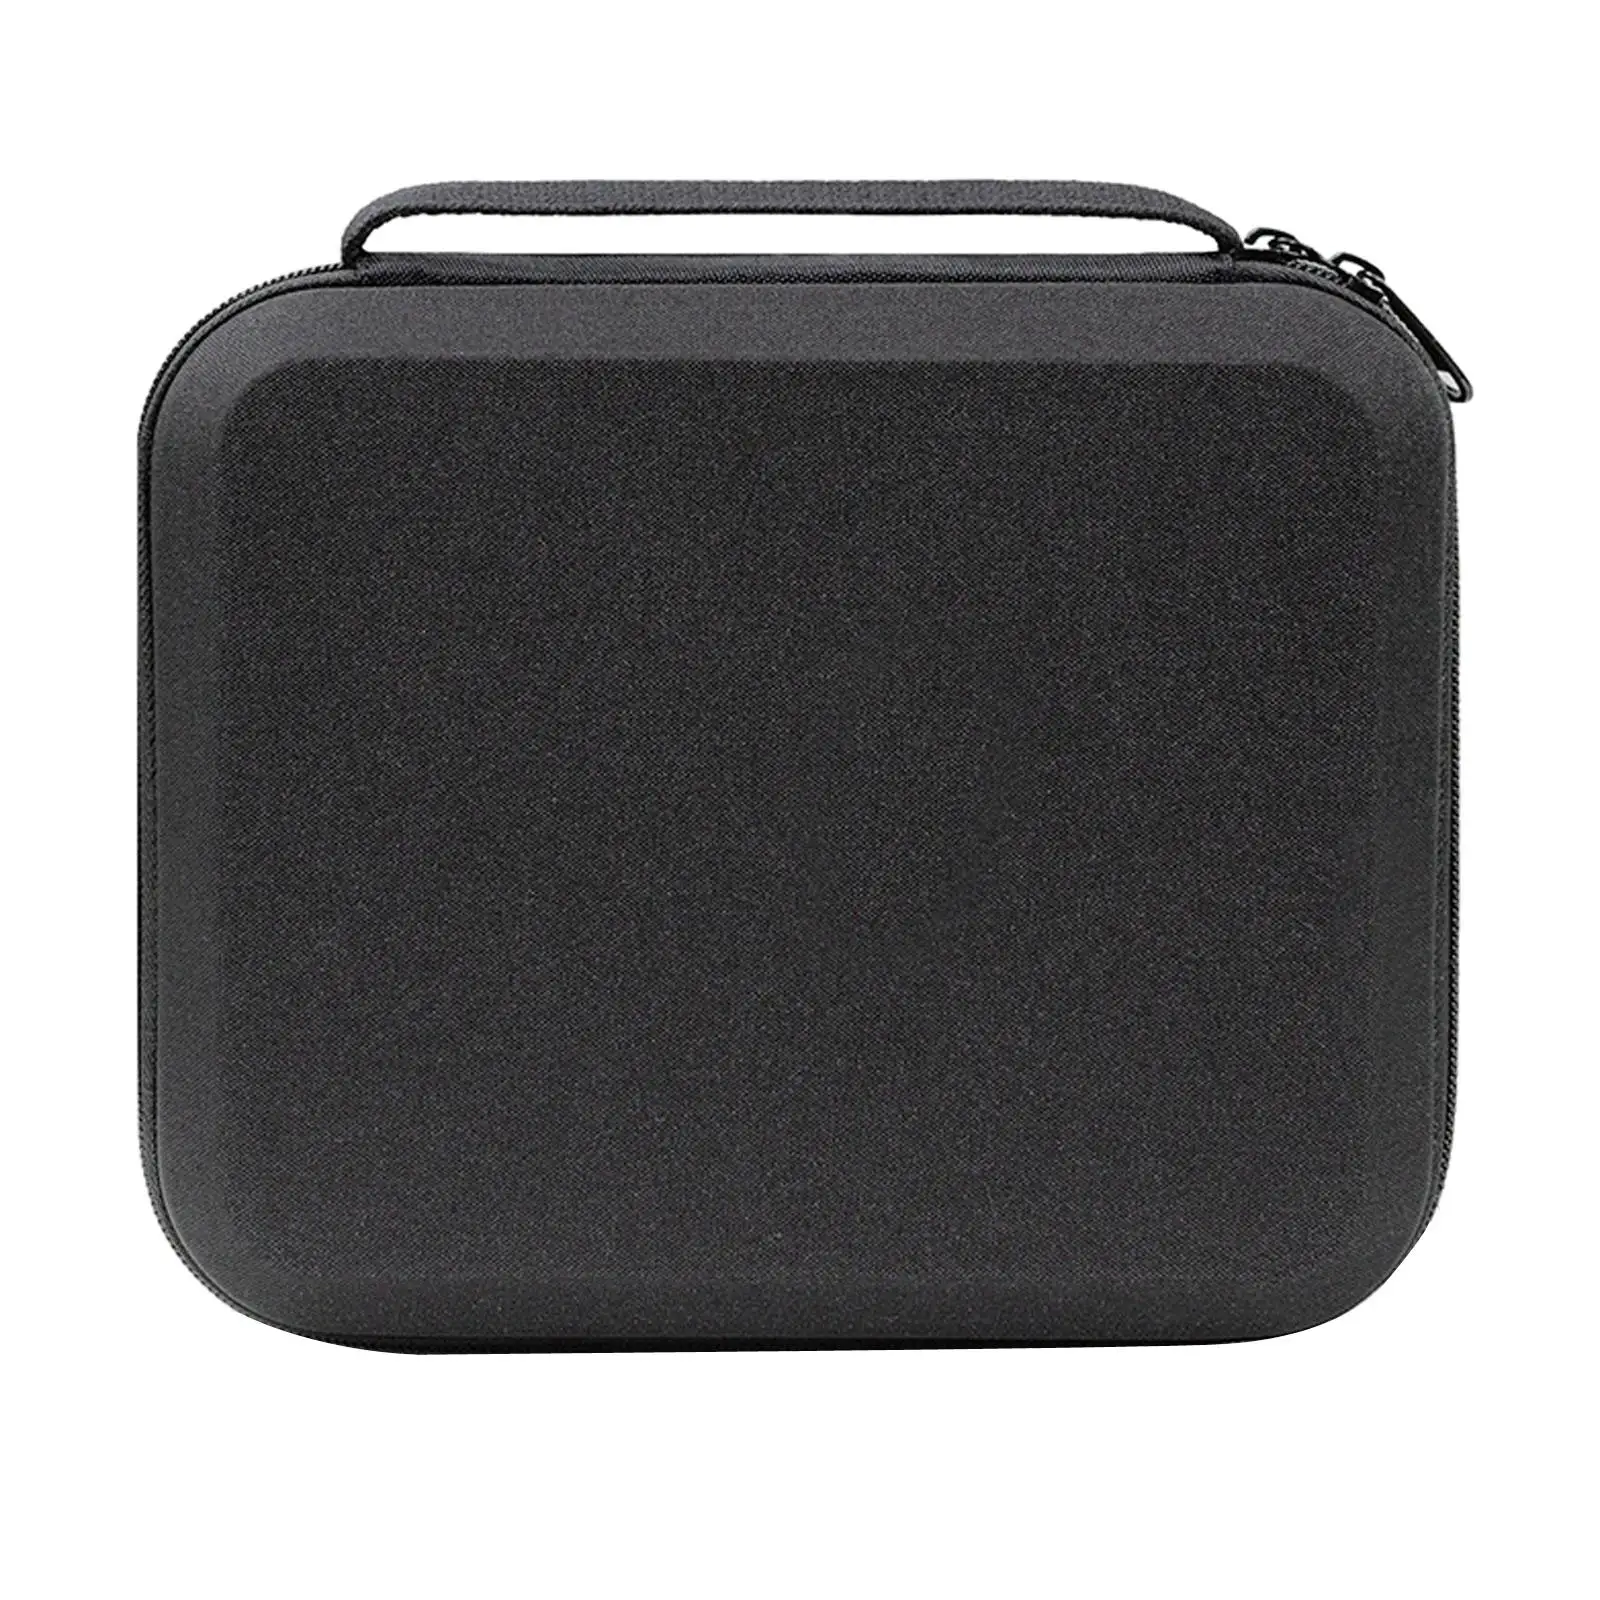 Travel Drone Carrying Case Travel Case Suitcase RC Remote Control Package Storage Bag for DJI Mini 3 Pro Quadcopter Parts